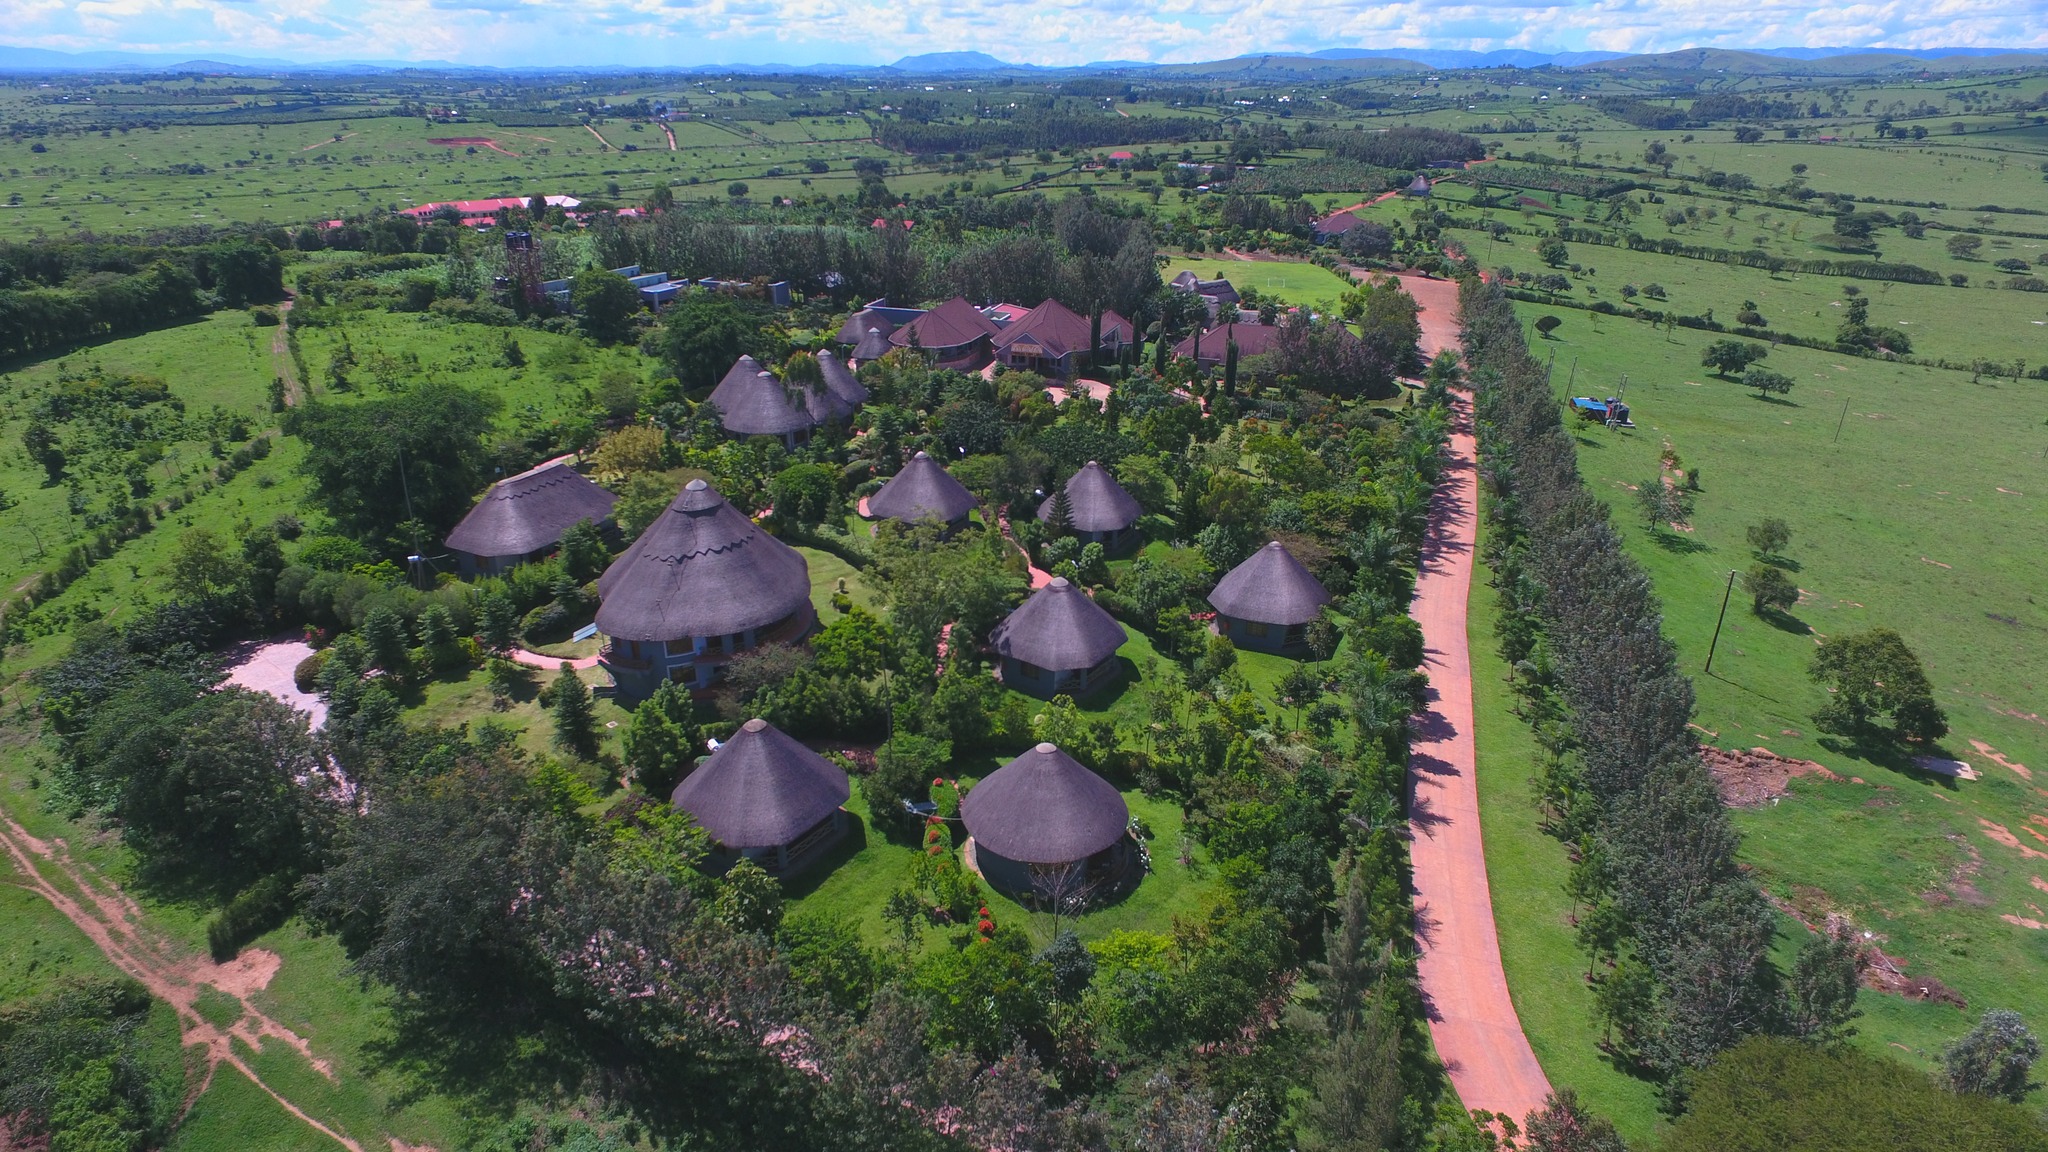 Constructed from locally sourced materials, the farm lodge showcases traditional architecture, showcasing the rich cultural heritage of the region, while organic gardens provide fresh produce for guests. Each room is thoughtfully designed to provide comfort and tranquility, with panoramic views that leave visitors comfortably breathless.
📧 reservations@emburarafarmlodge.com
☎️ +256776210872 | +256776200080 | +256706666000
🌐 www.emburarafarmlodge.com
#EmburaraFarmLodge #LifeOnTheFarm #AuthenticExperience #ExploreUganda #ExploreAnkole #LuxuriousComfort